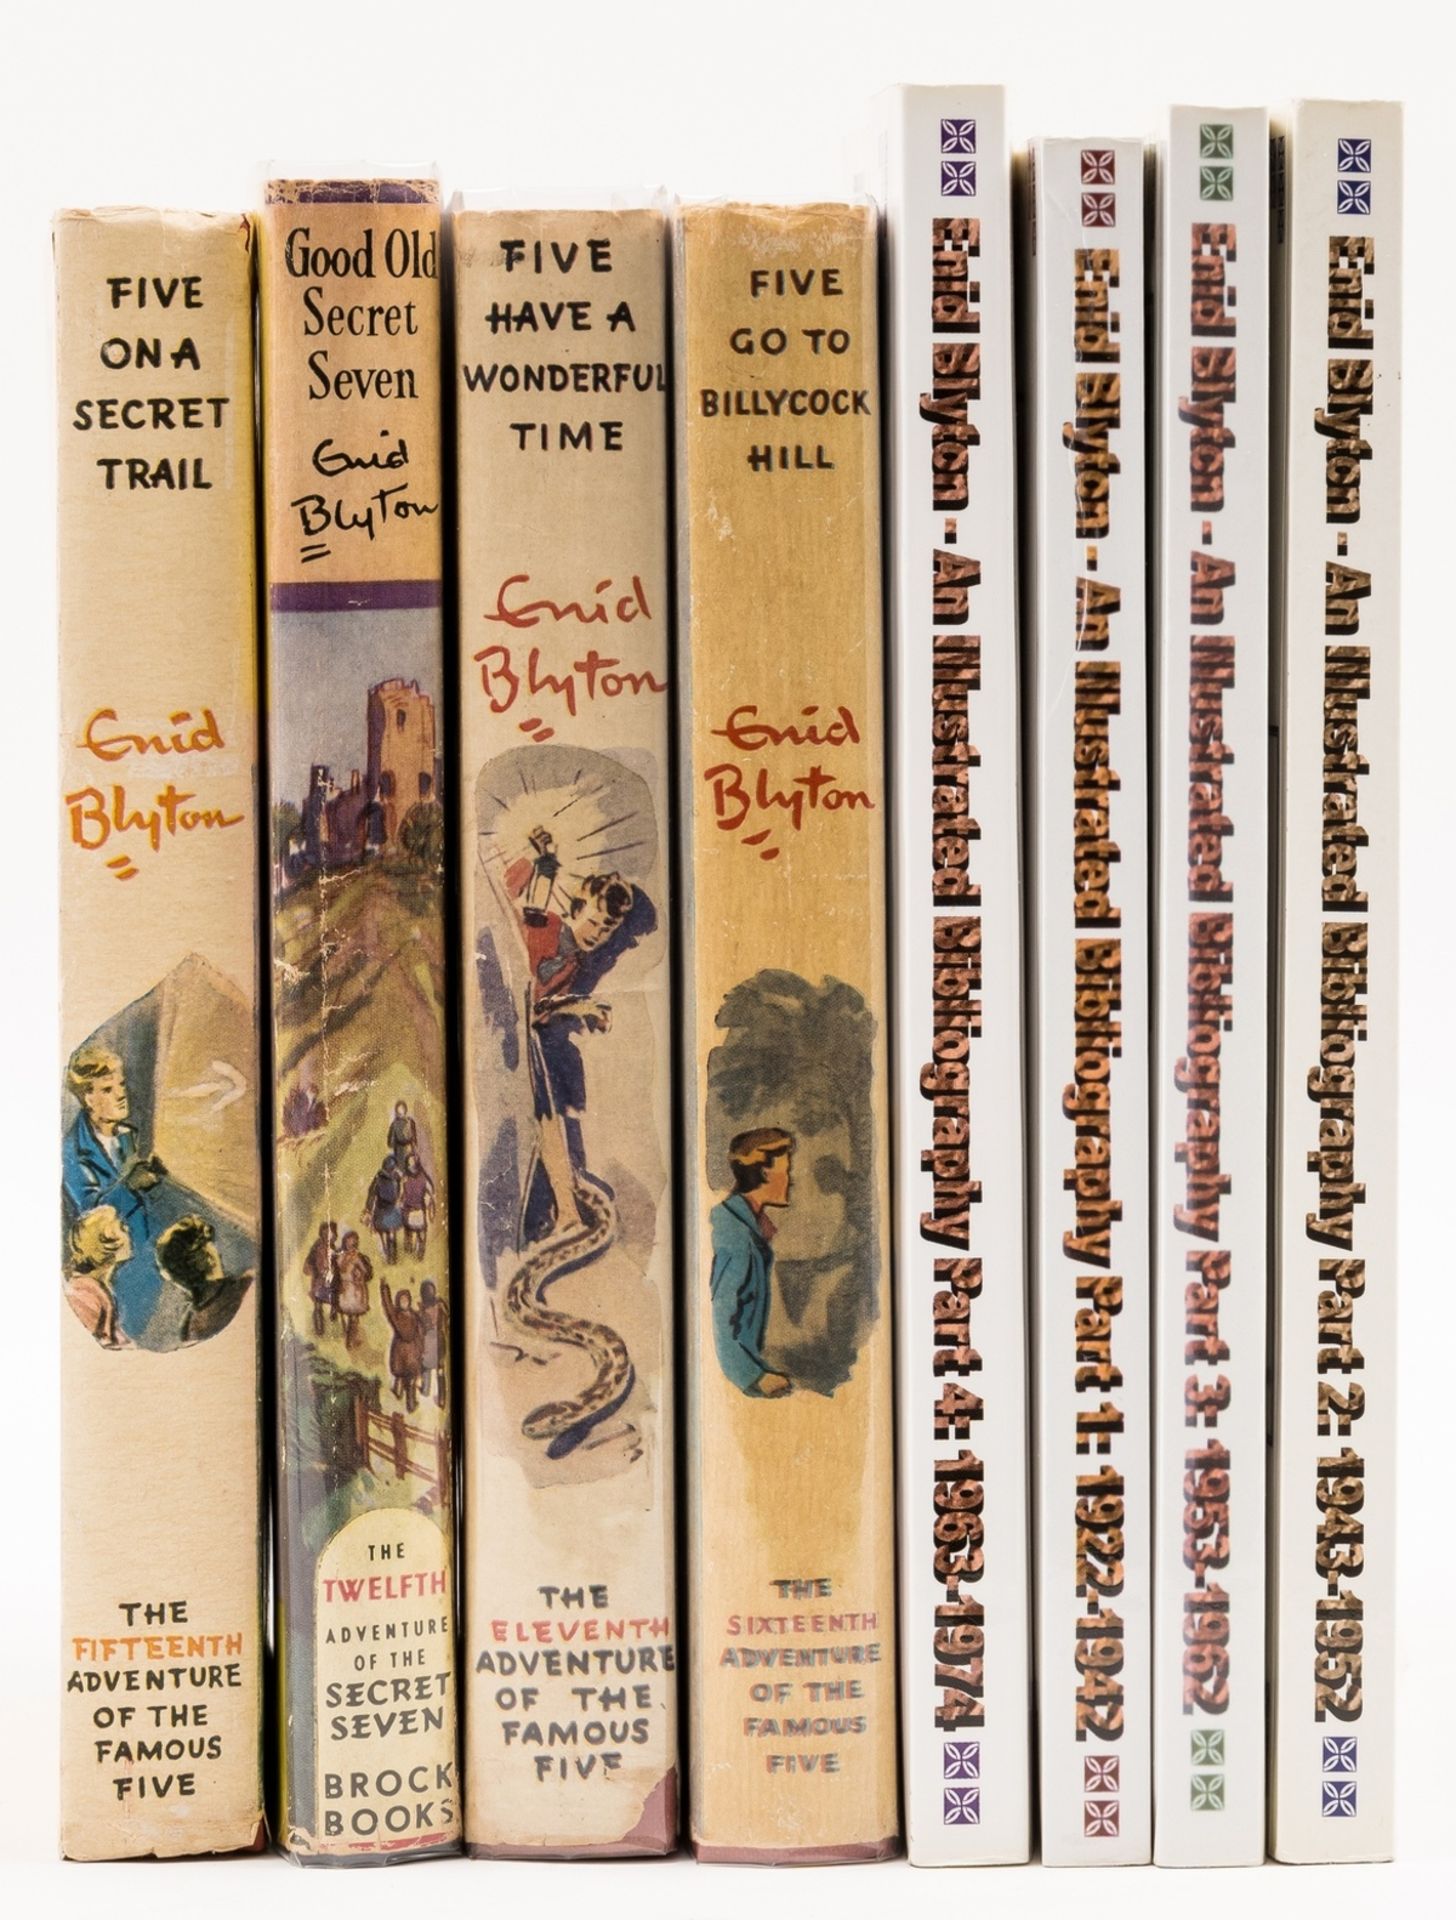 Blyton (Enid) Five Have a Wonderful Time, first edition, 1952 & others by Blyton, including a …